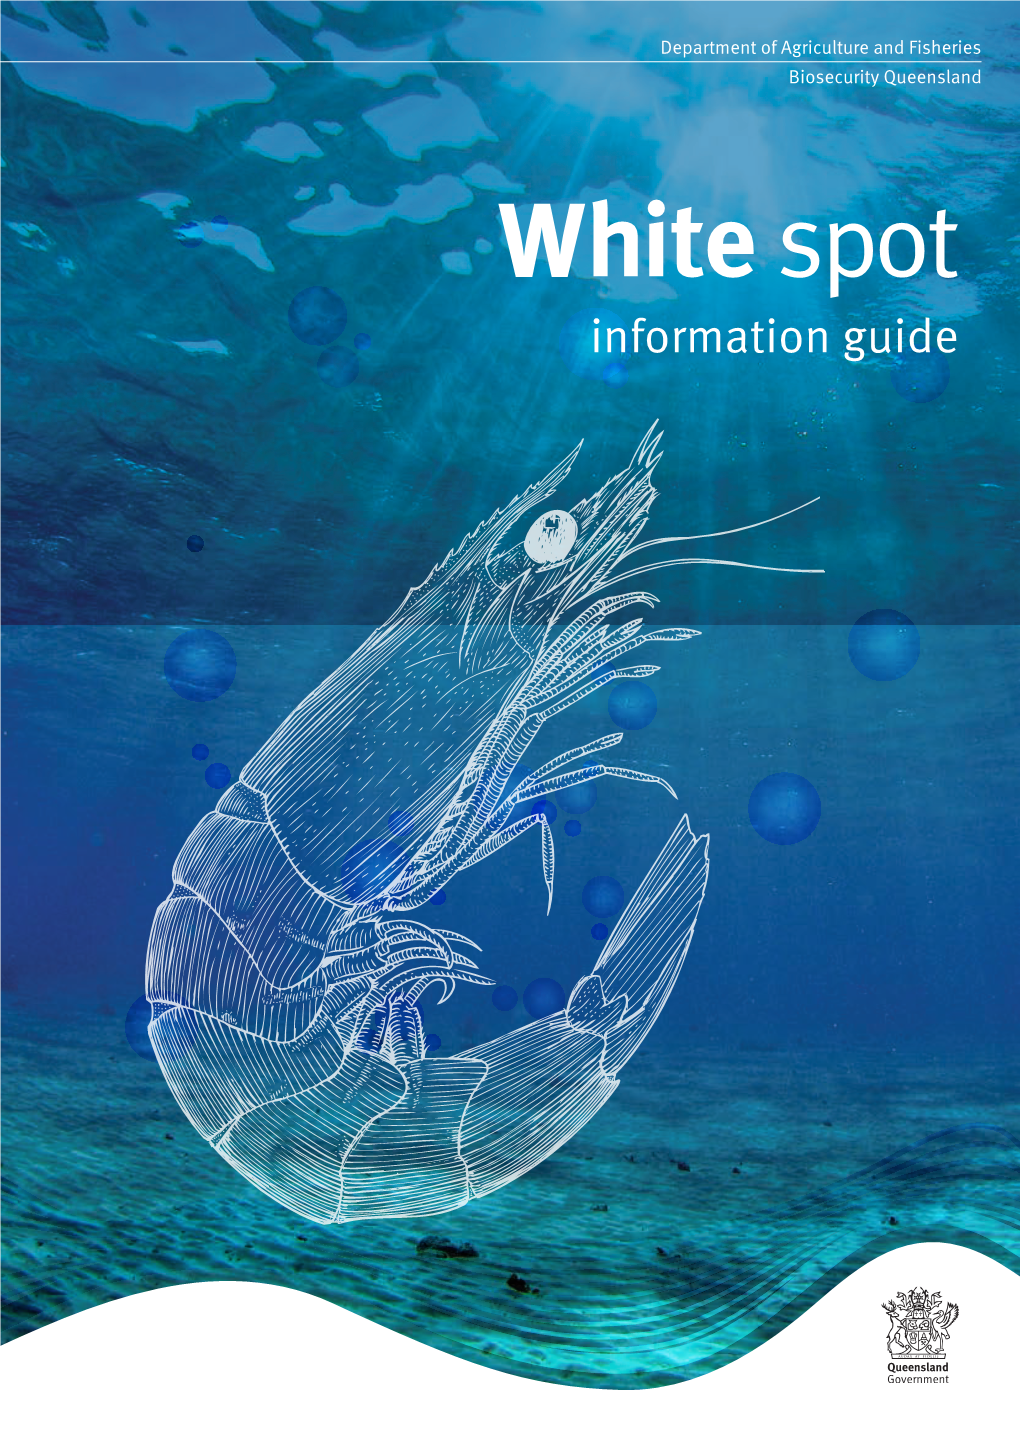 White Spot Information Guide This Publication Has Been Compiled by Biosecurity Queensland, for the Department of Agriculture and Fisheries